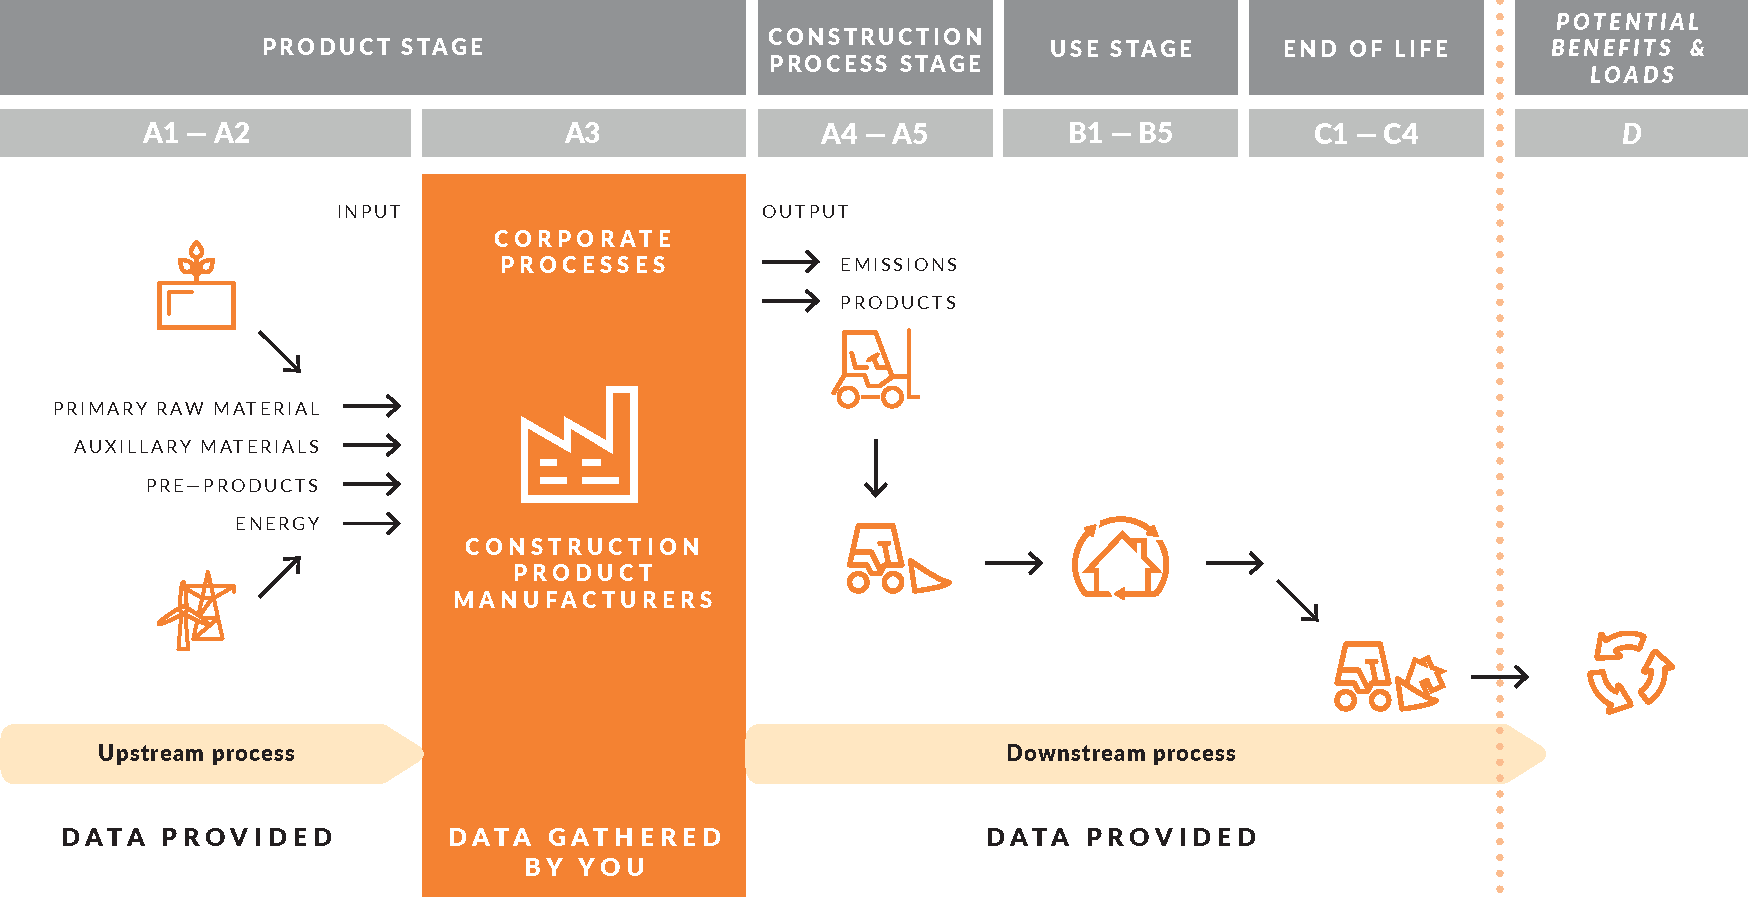 Data collection & supply in the supply chain of a construction product. The supply chain is subdivided into upstream, internal and downstream processes